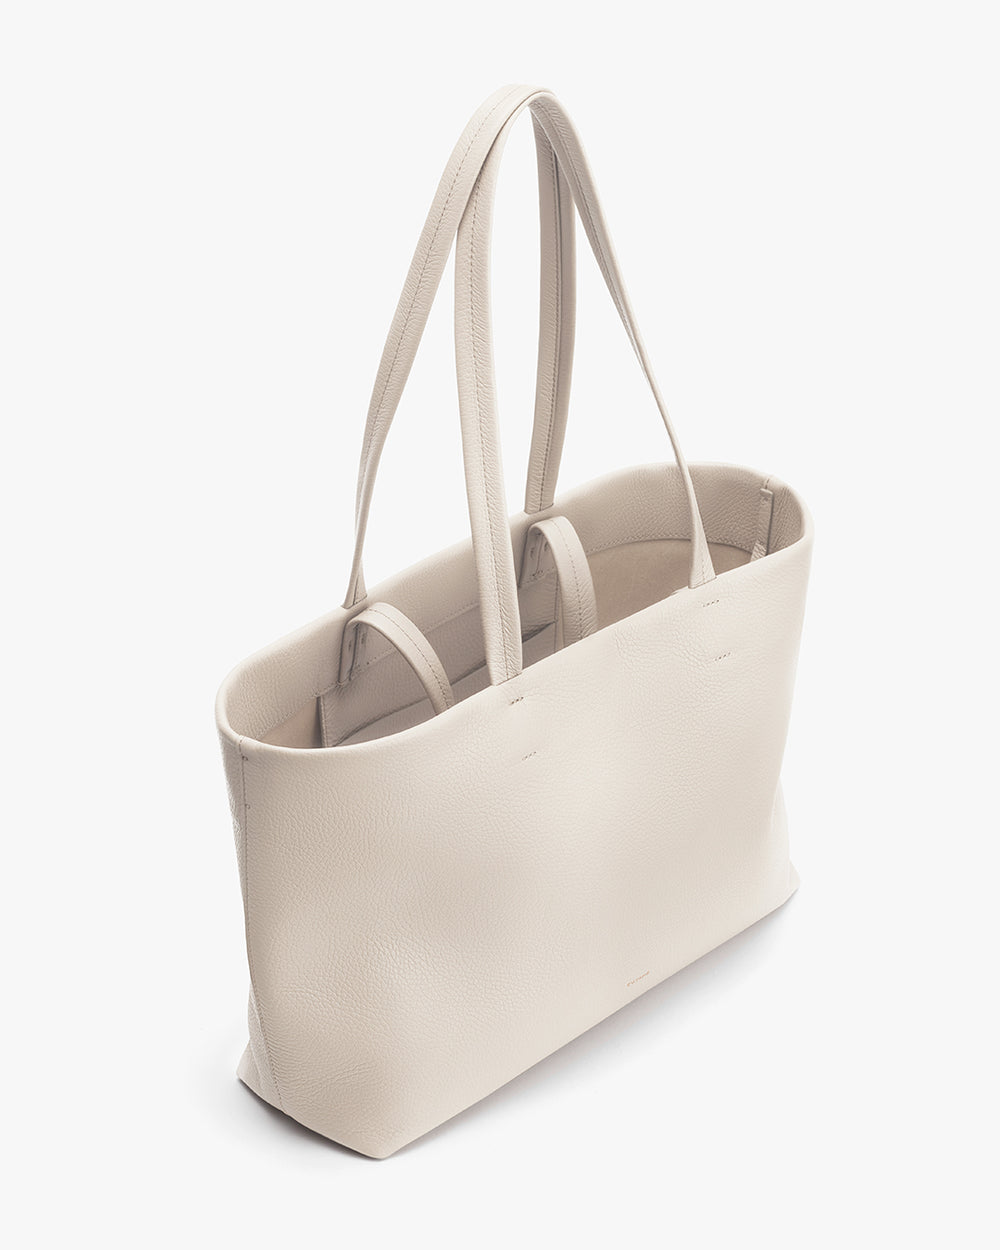 Tall tote bag with two handles standing upright.